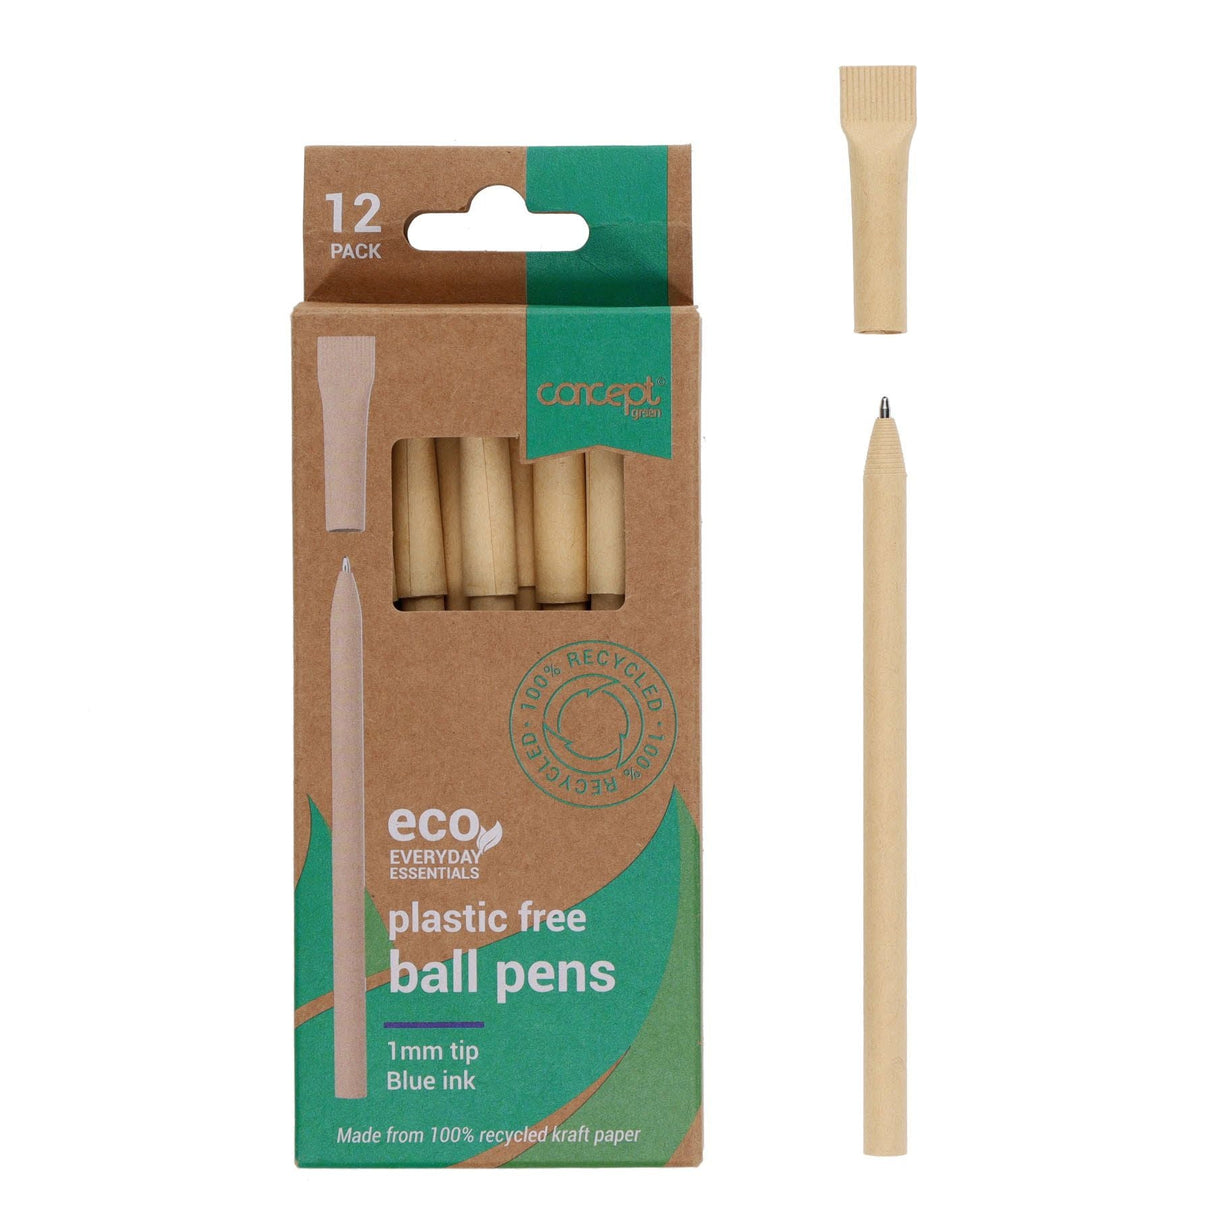 Concept Green Ball Pens - 1mm - Blue Ink - Pack of 12 | Stationery Shop UK